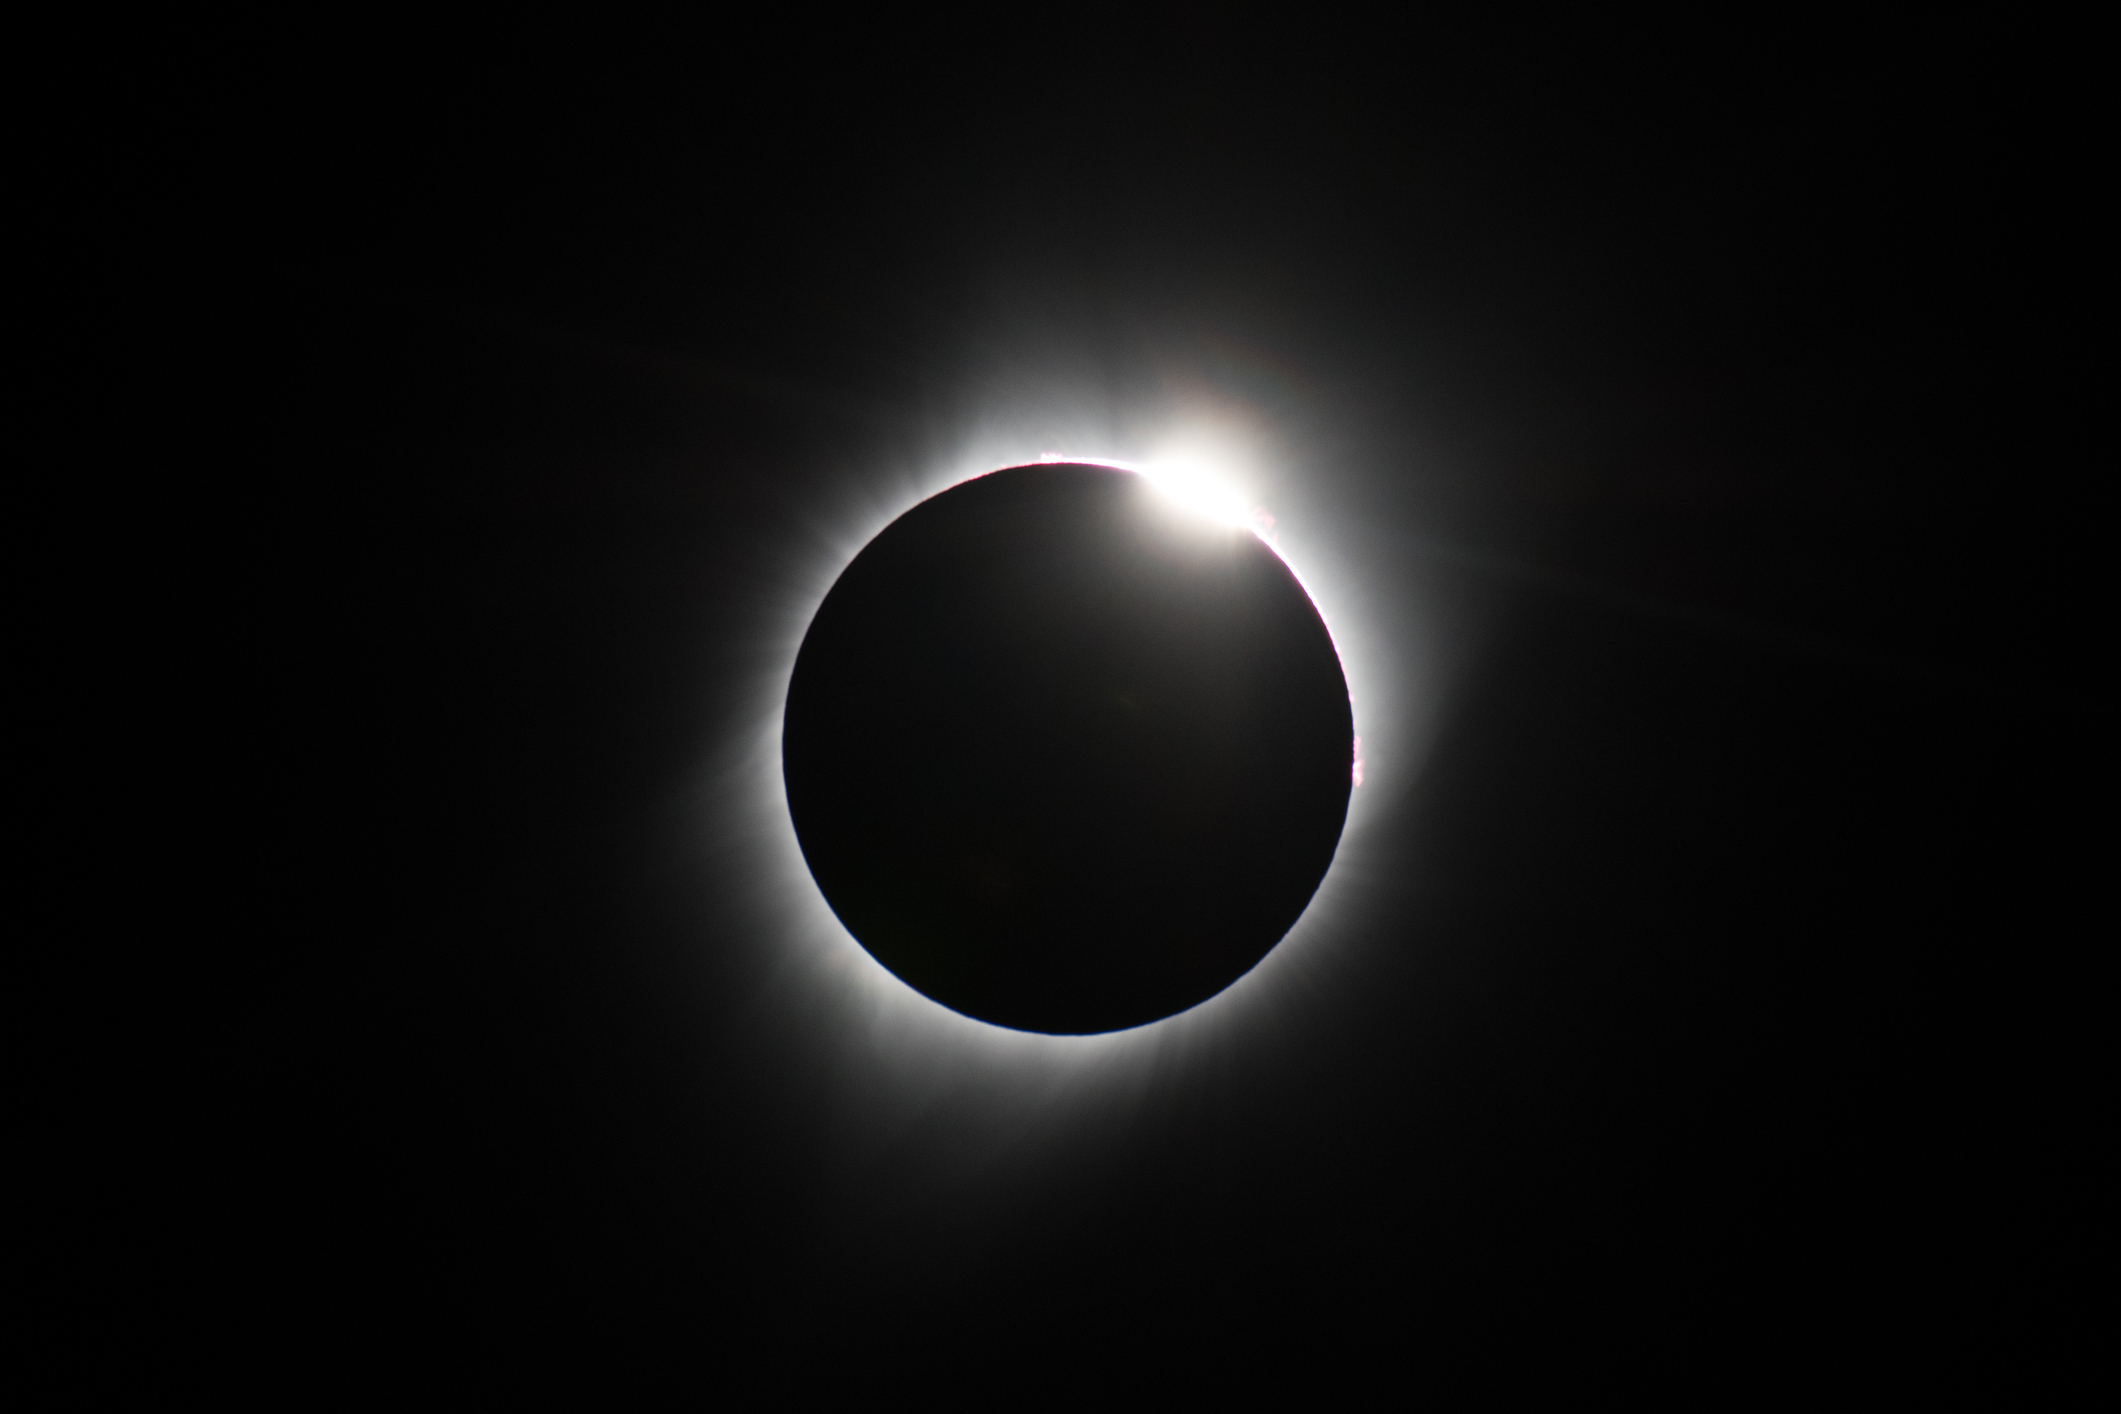 A total solar eclipse captured with the moon completely covering the sun, except for a bright light peeking out from the edge